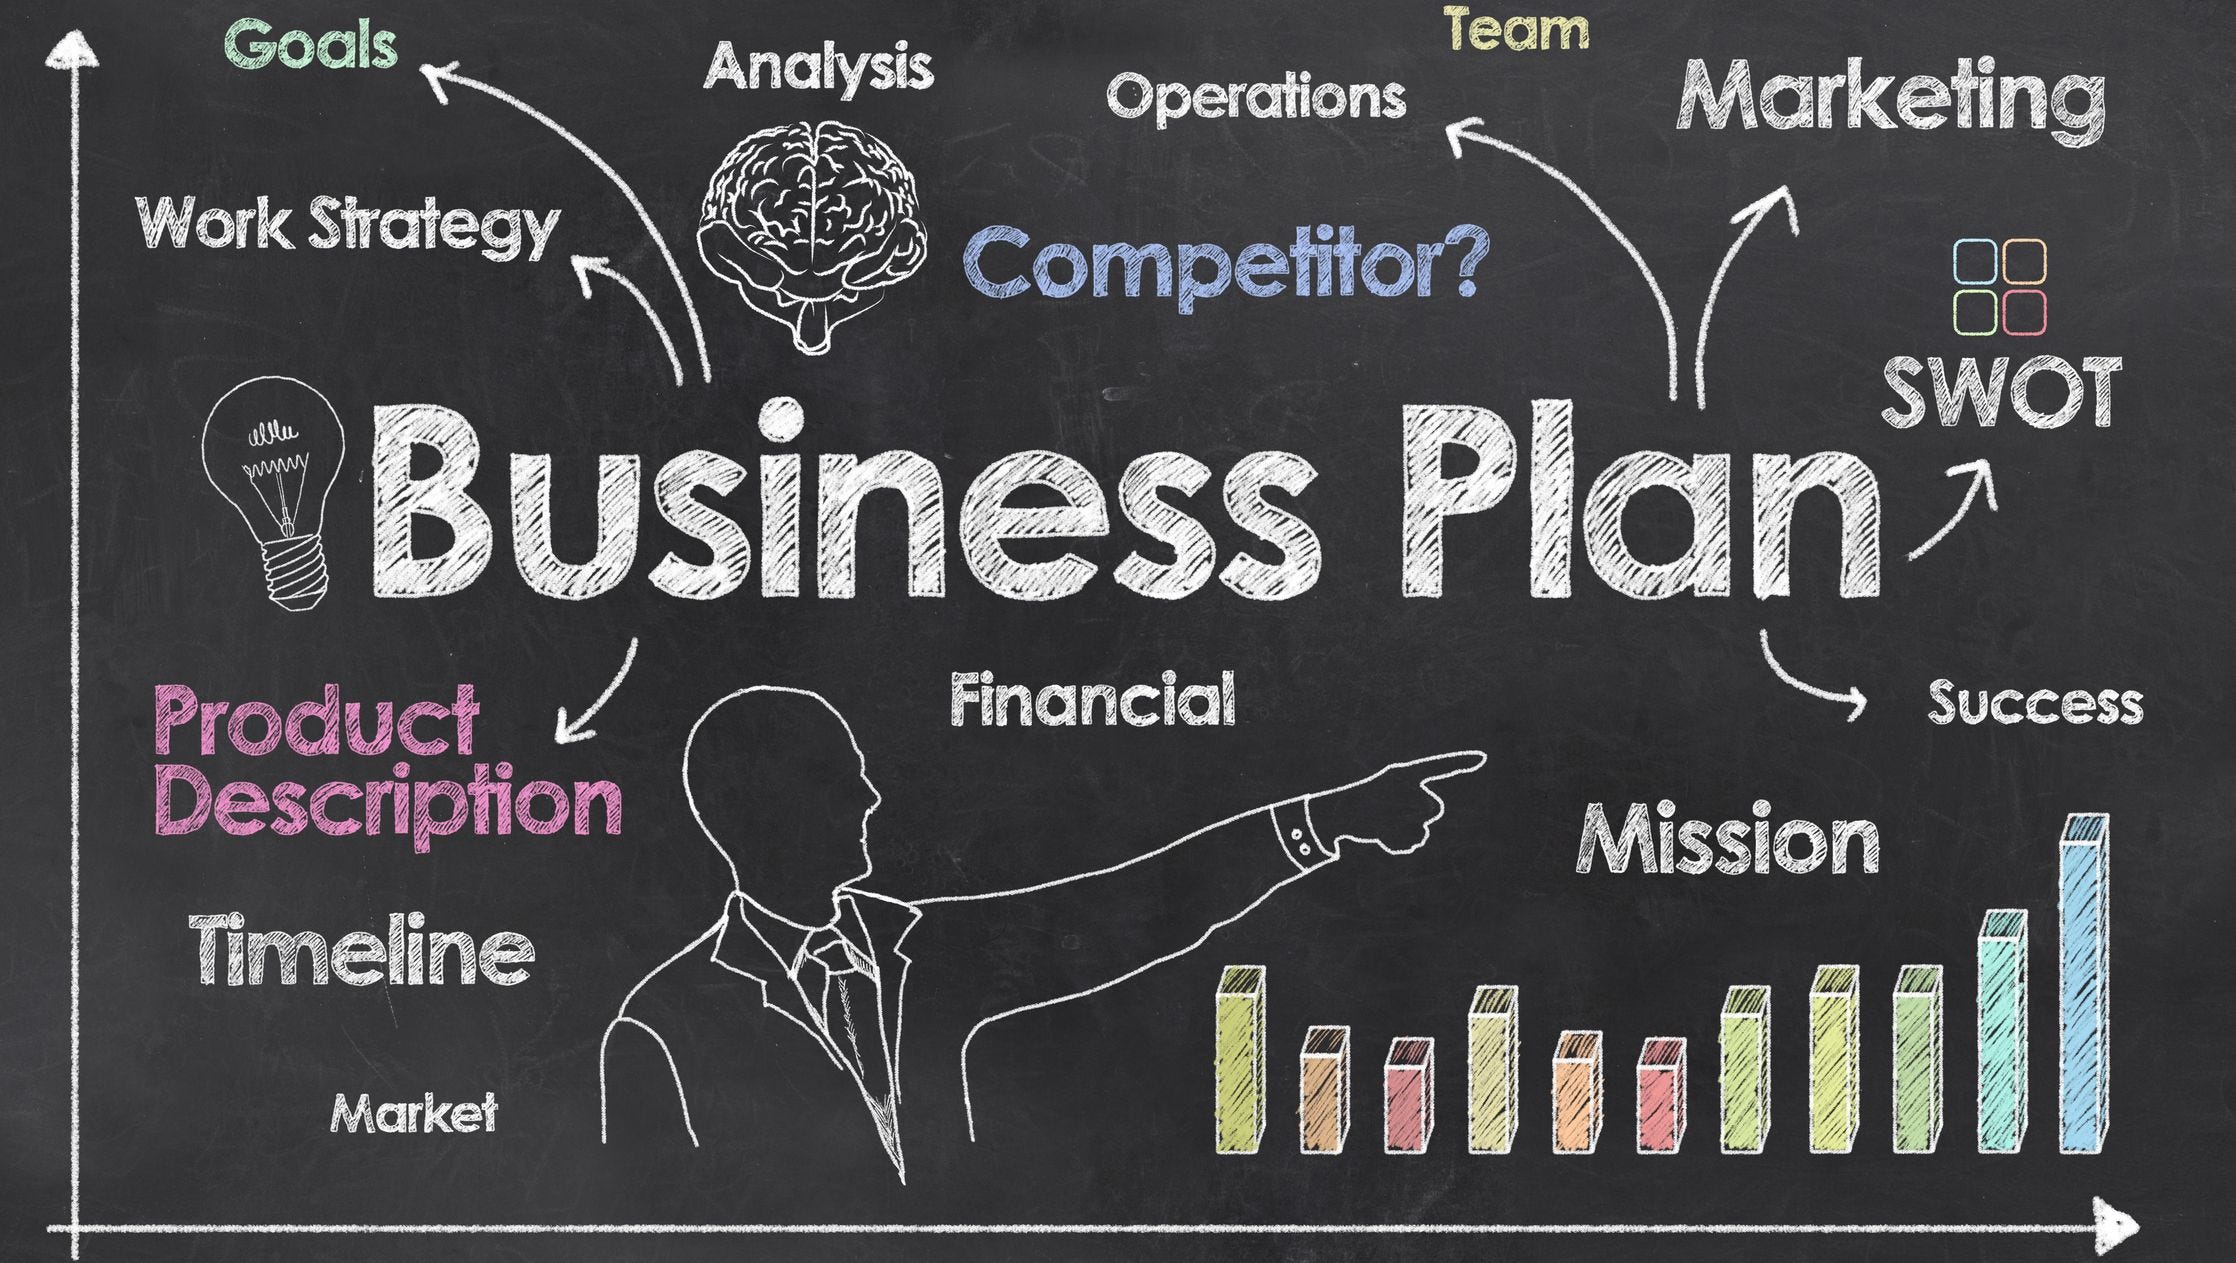 a business plan is critical to